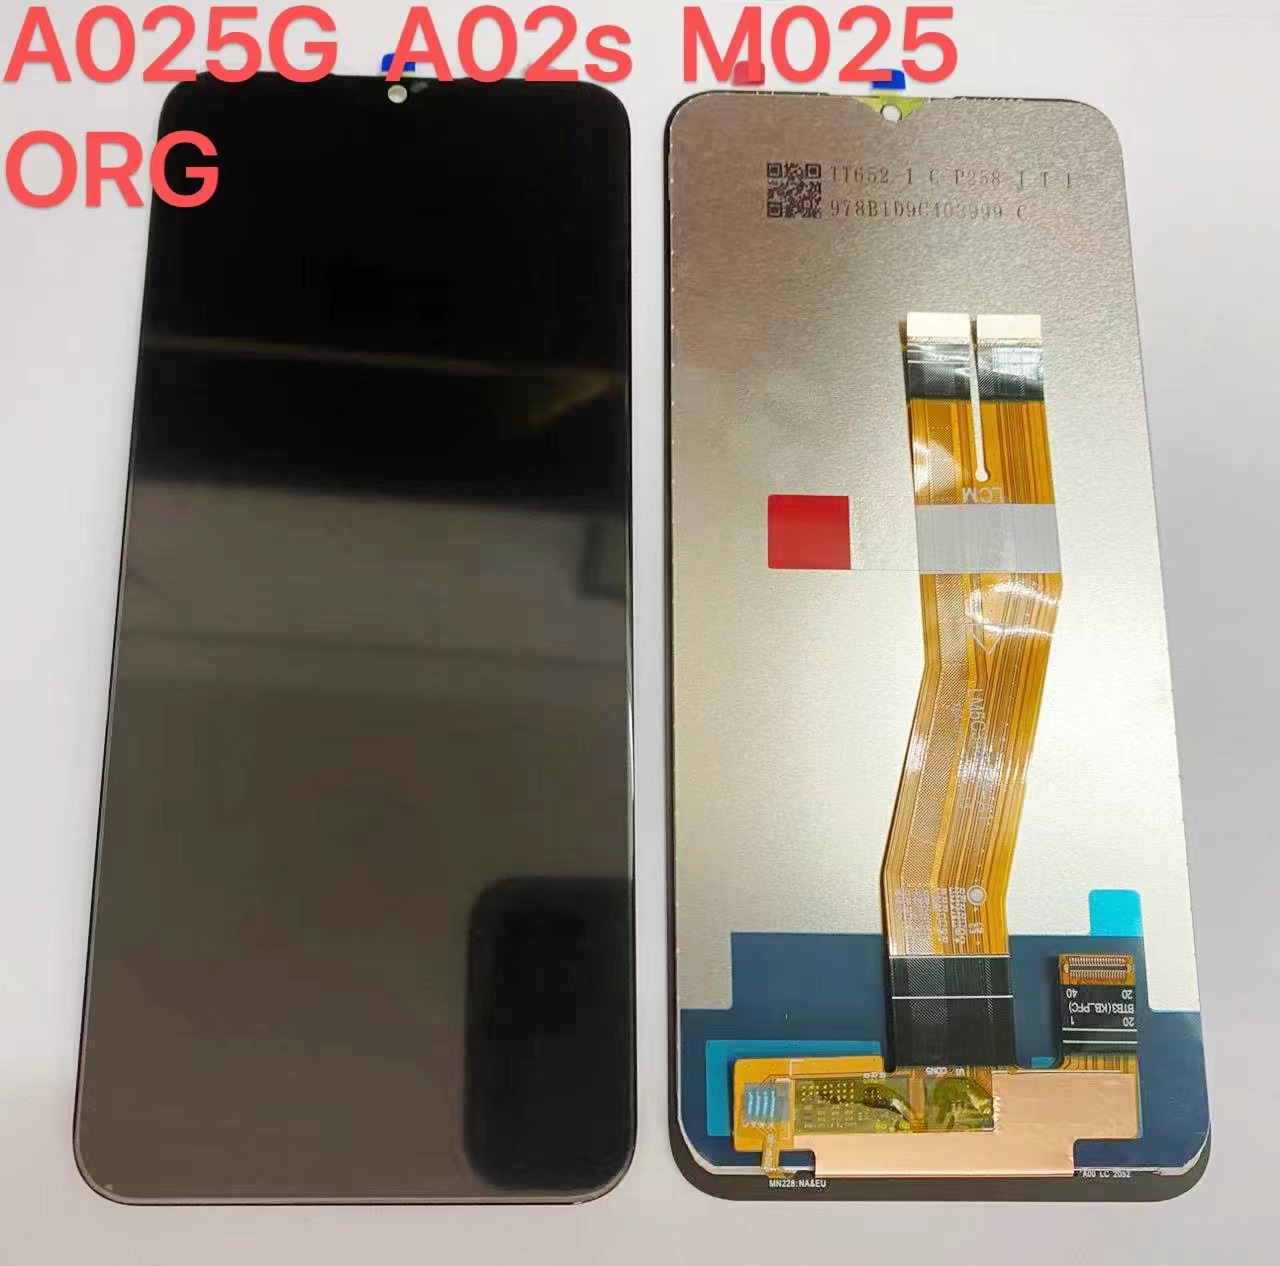 For Samsung A02S ORG Lcd Screen display and Lcd Screen replacement